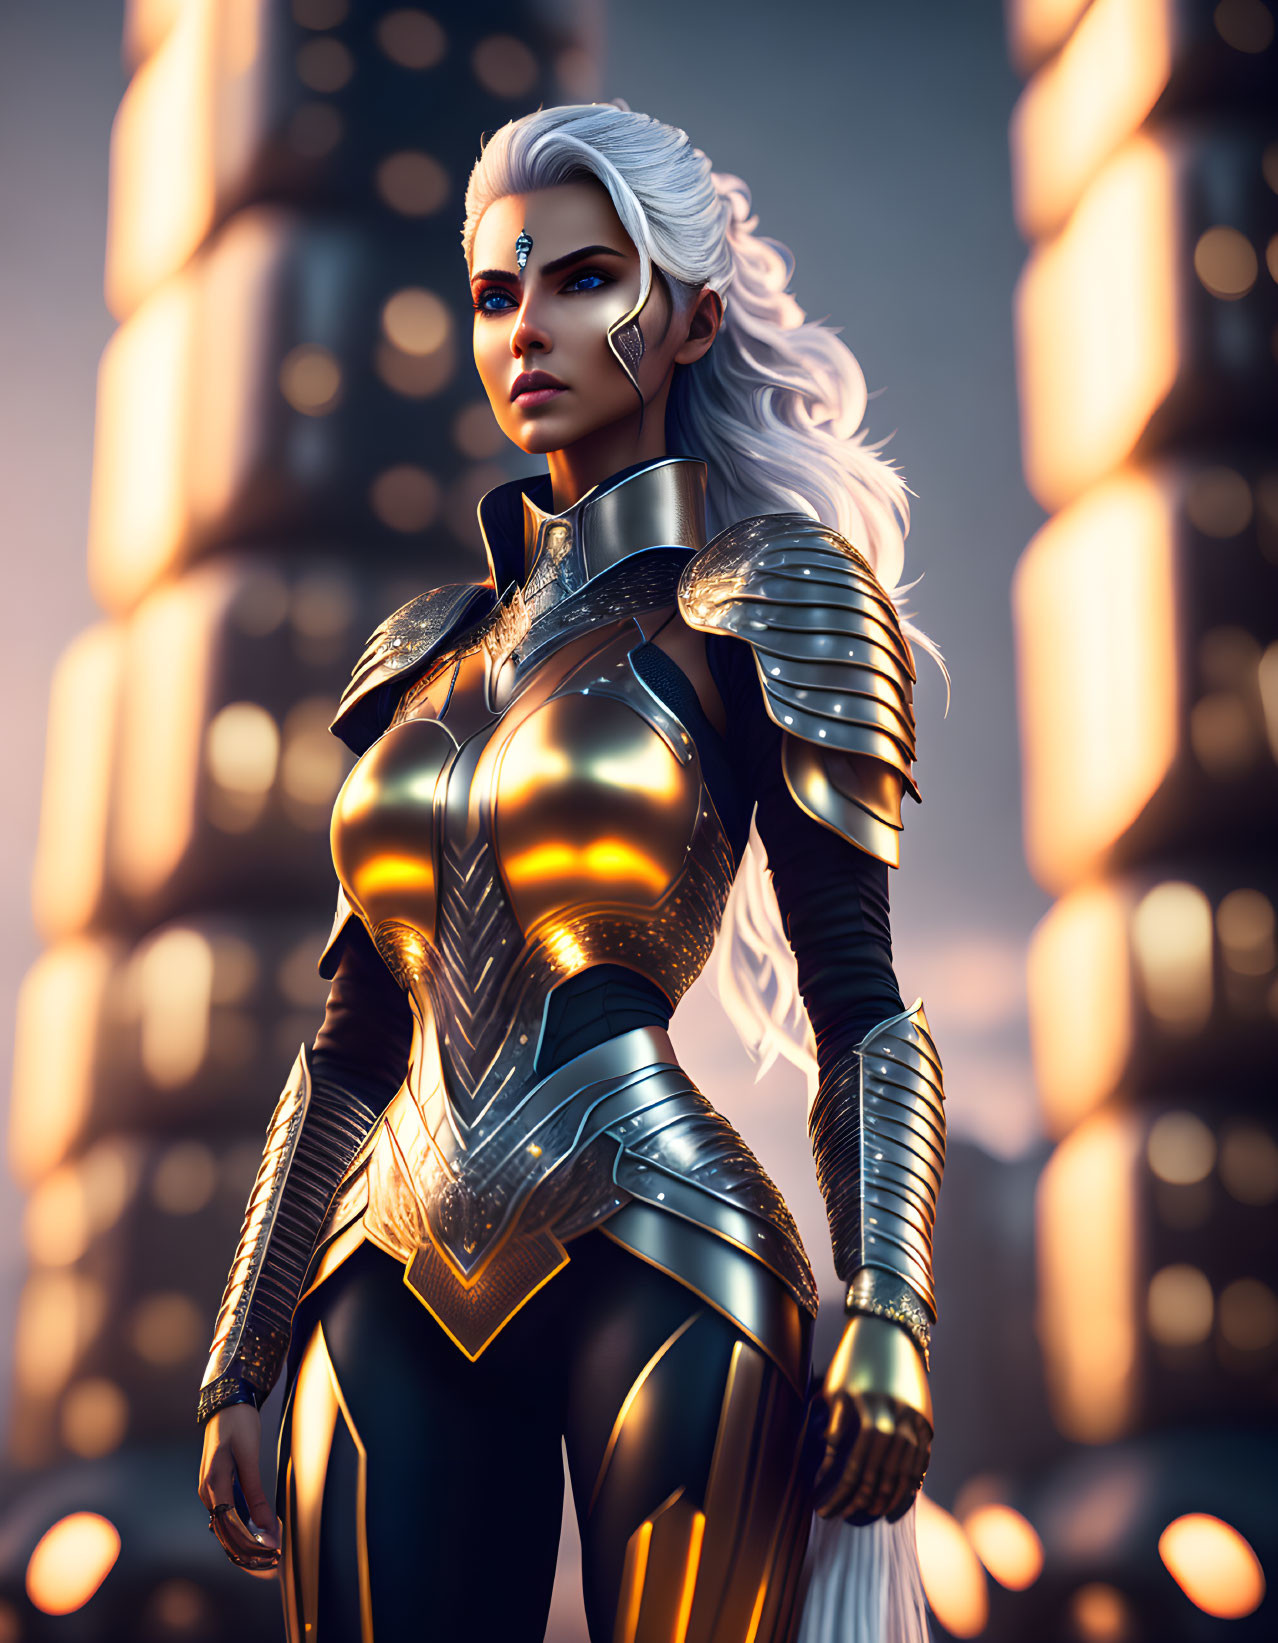 Female warrior in futuristic golden armor with white hair, standing in glowing cityscape